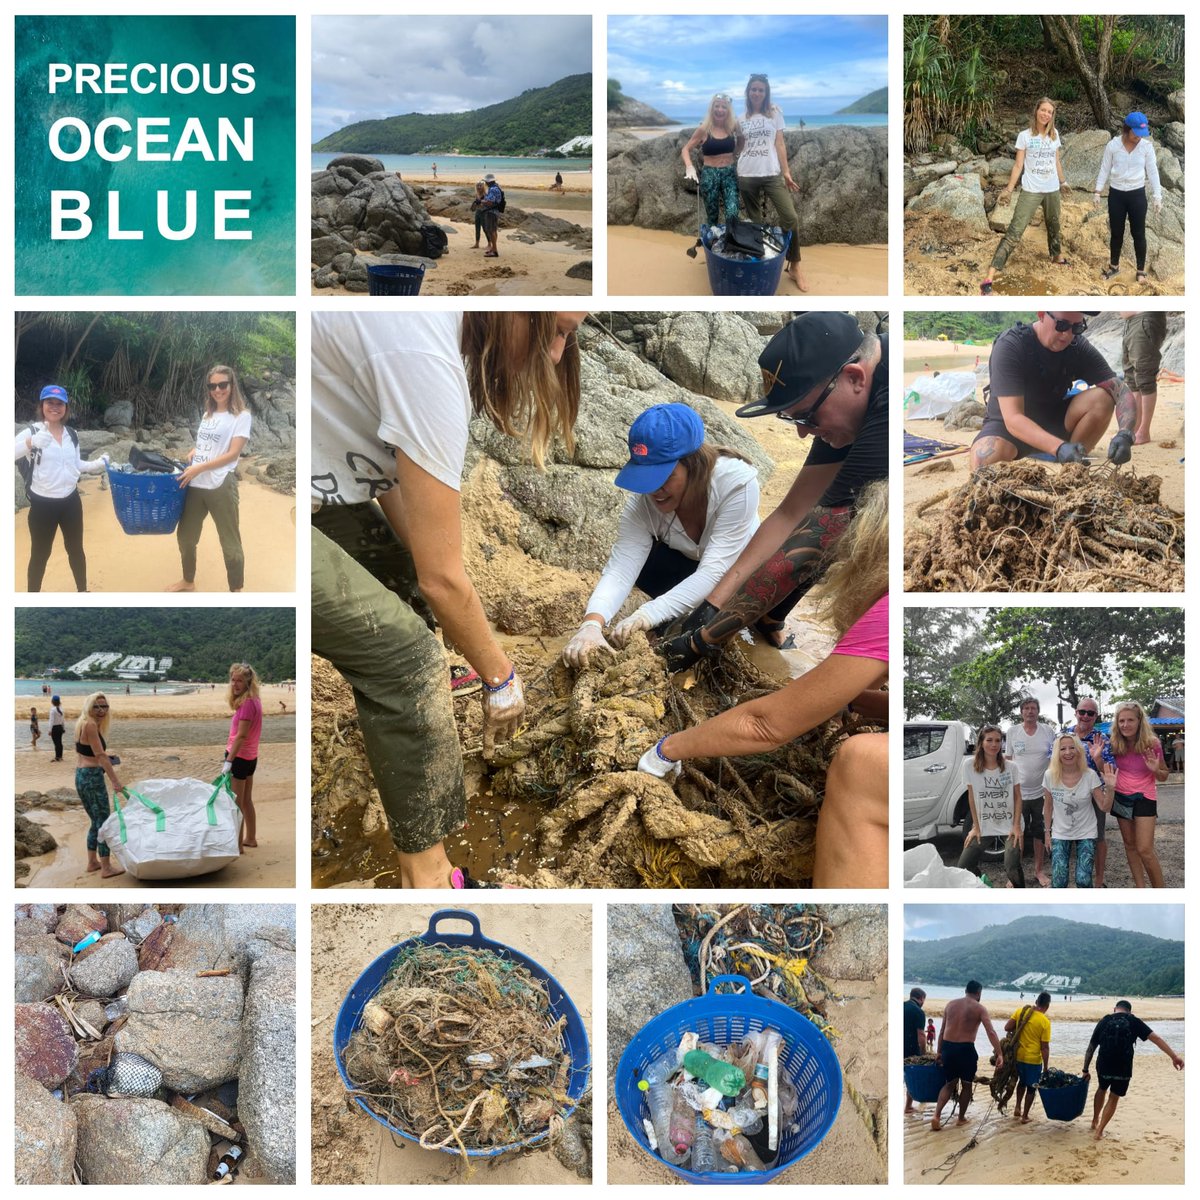 Thanks to all who joined our beach clean-up 🌊🧹
We removed tons of plastic, styrofoam, bags, and a massive fishing net from the ocean. The trash is being sorted and sent to organizations. Your support makes a big difference. 🌊💙 
#BeachCleanUp #ProtectOurOcean